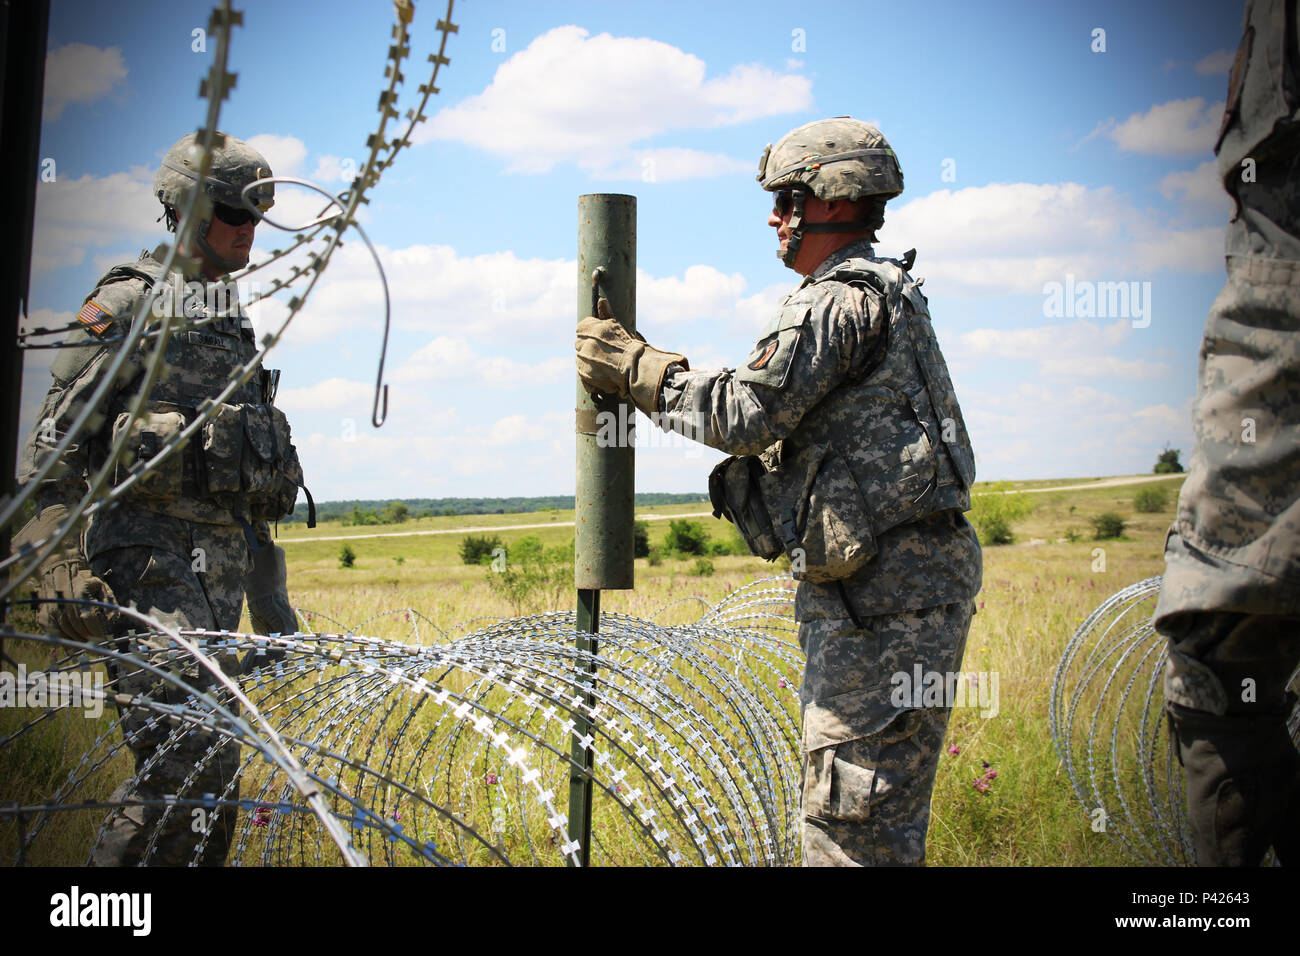 Soldiers of the 287th Engineer Company, 890th Engineer Battalion, set up an Entry Control Point at the Command Post of the Special Troops Battalion, 155th Armored Brigade Combat Team on June 7, 2016, at Fort Hood, Texas. The 287th En. Co. is an enabler unit for the 155th Armored Brigade Combat Team’s Multi-integrated Echelon Brigade Training Exercise. (Mississippi National Guard photos by Sgt. Brittany Johnson 155th Armored Brigade Combat Team Public Affairs/Released) Stock Photo